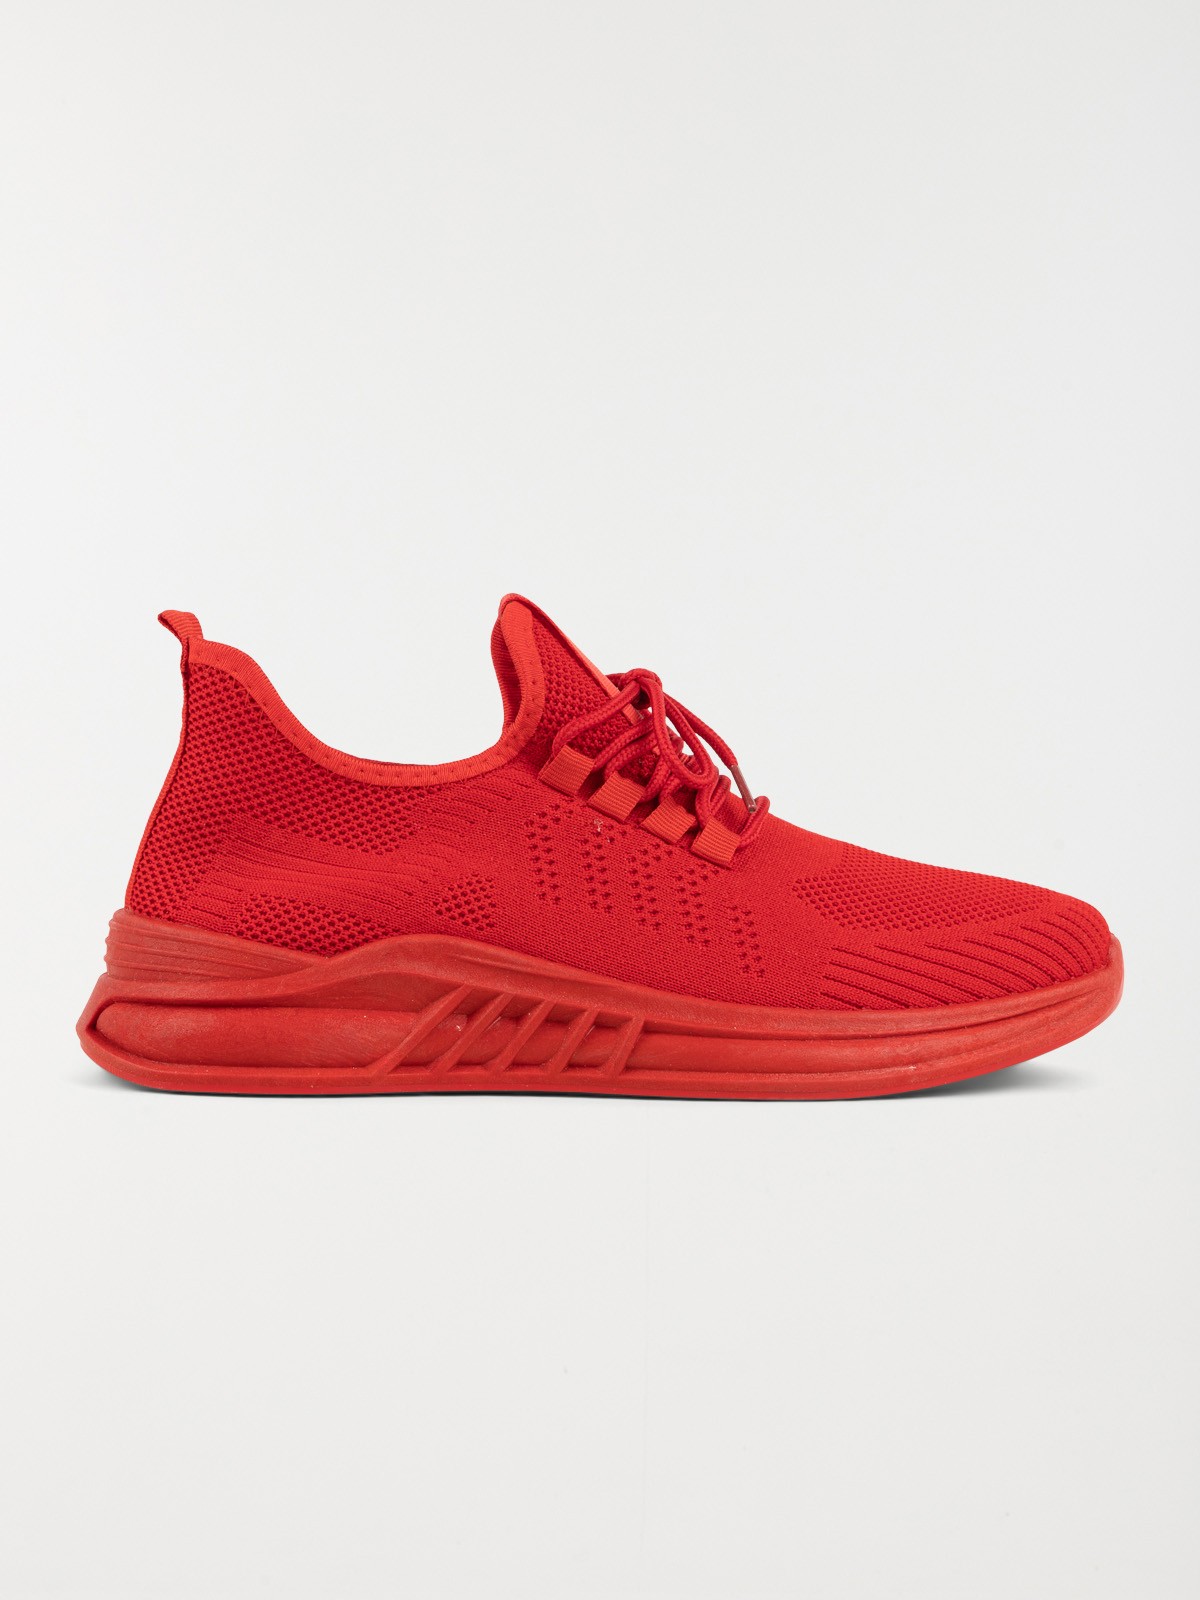 Chaussures sport homme rouge (40-45) - DistriCenter